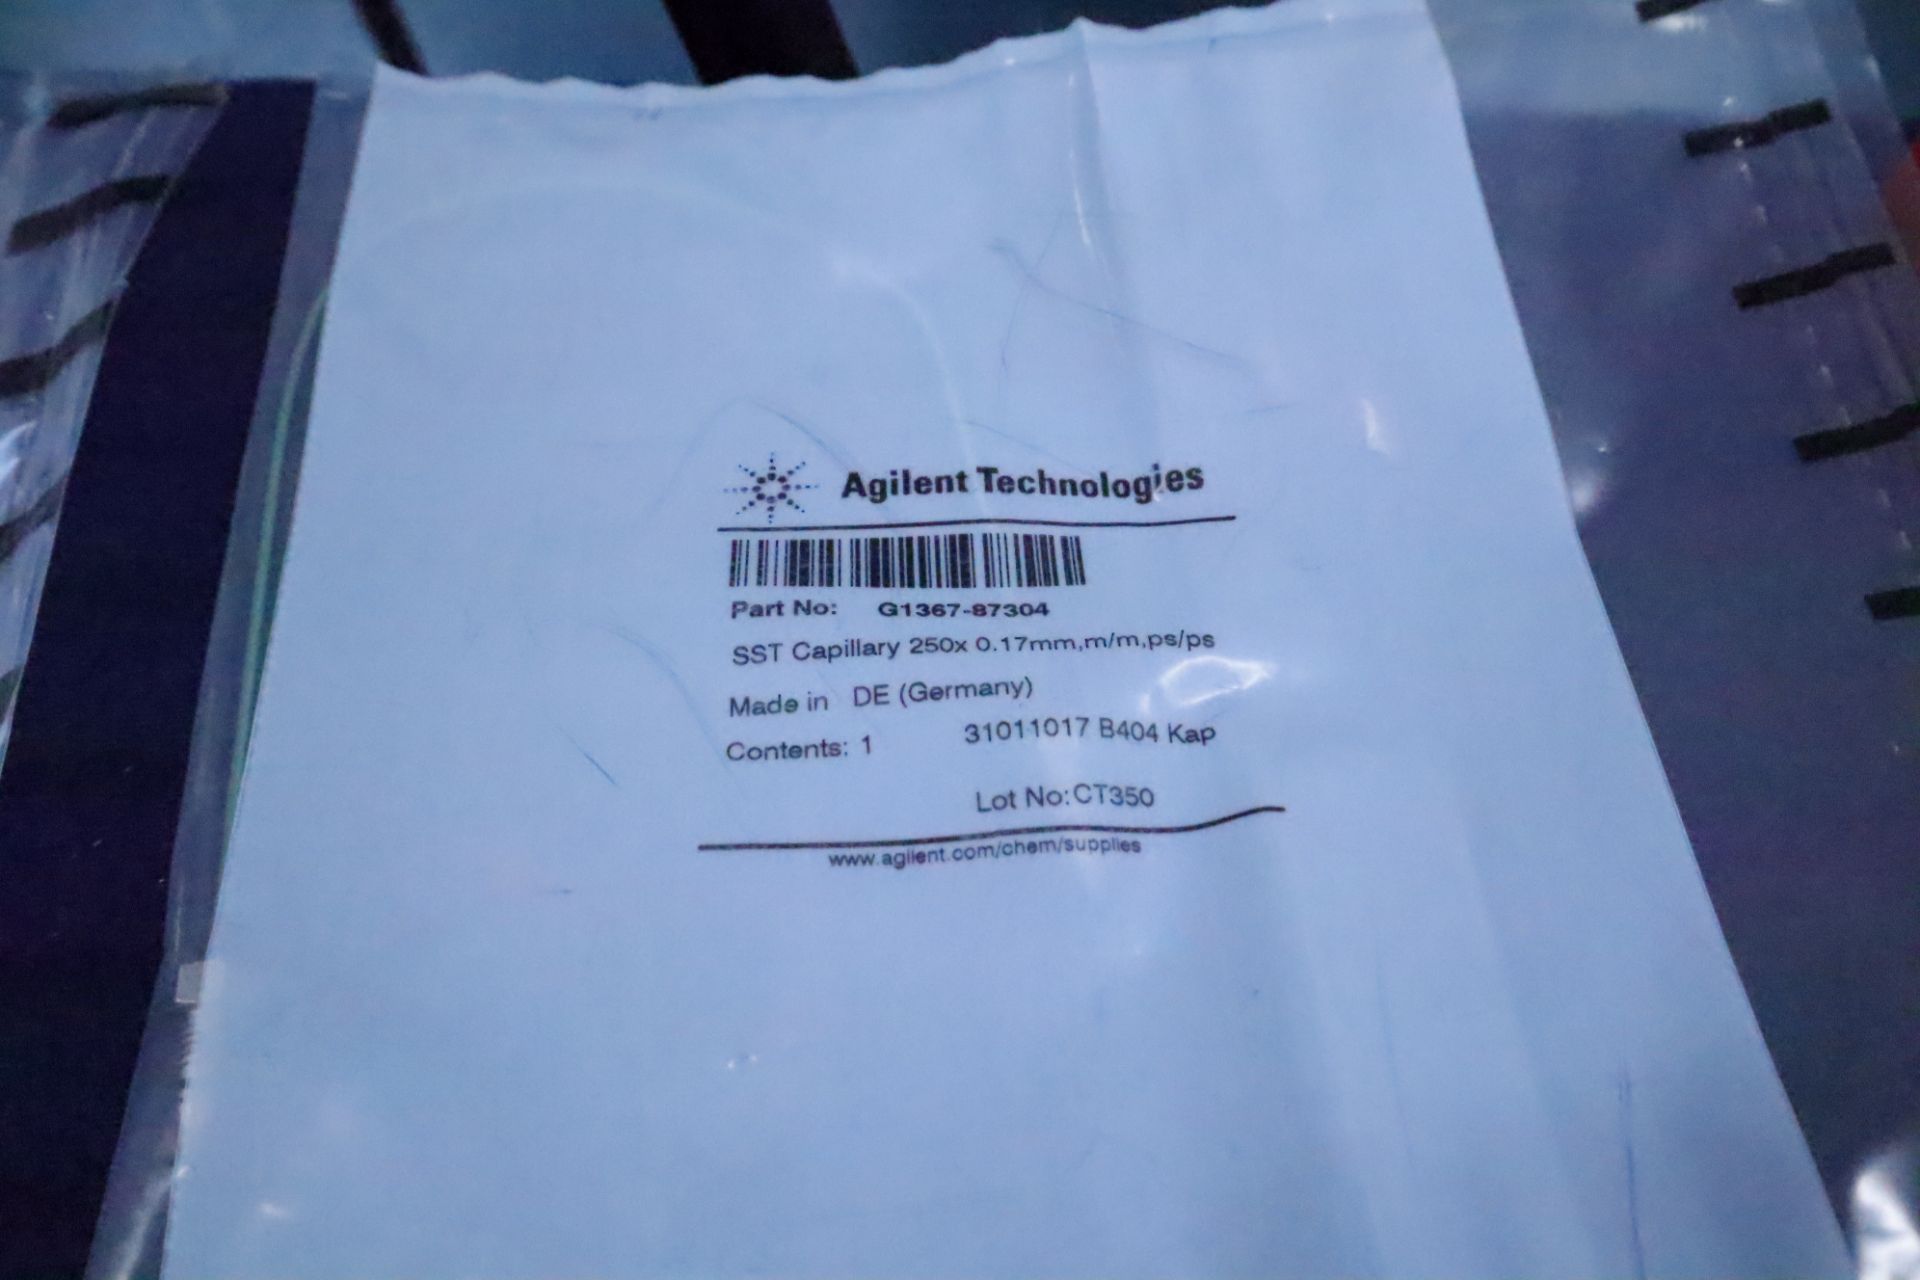 UPDATED PHOTOS Agilent Technologies OEM Replacement Parts and tool kits for LC/MS Machines - Image 29 of 37